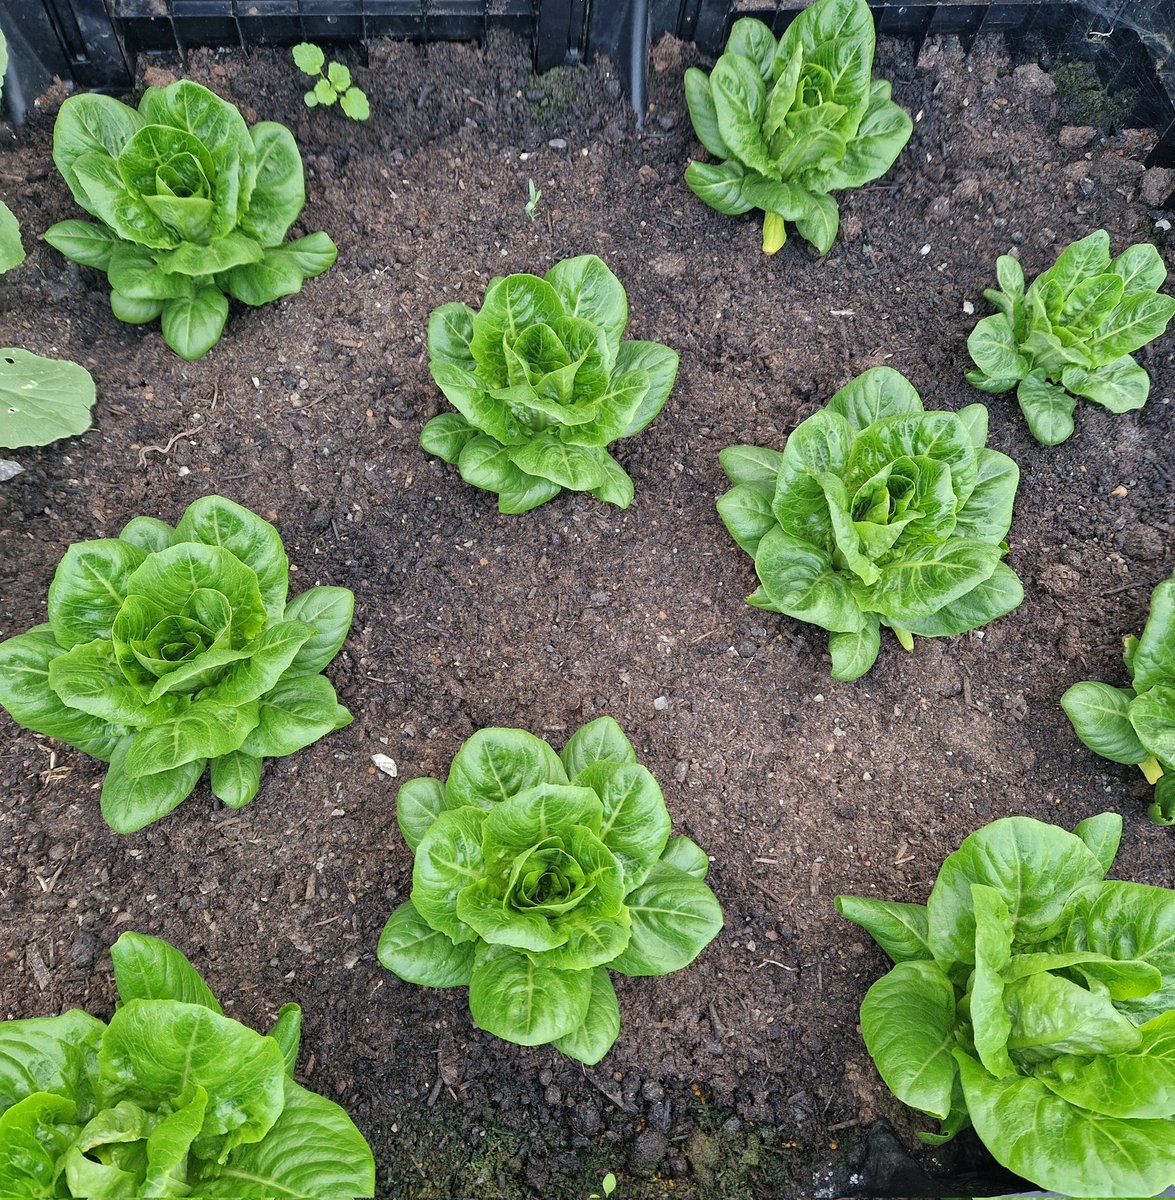 You can have all the fancy salad leaves in the World - but you can't beat a good old fashioned 'head of lettuce' Slug watch worked. My perfect heads almost ready. Can't wait to slap some between sliced pan & good old fashioned Salad Cream (not Mayonnaise) Bring back the Retro!